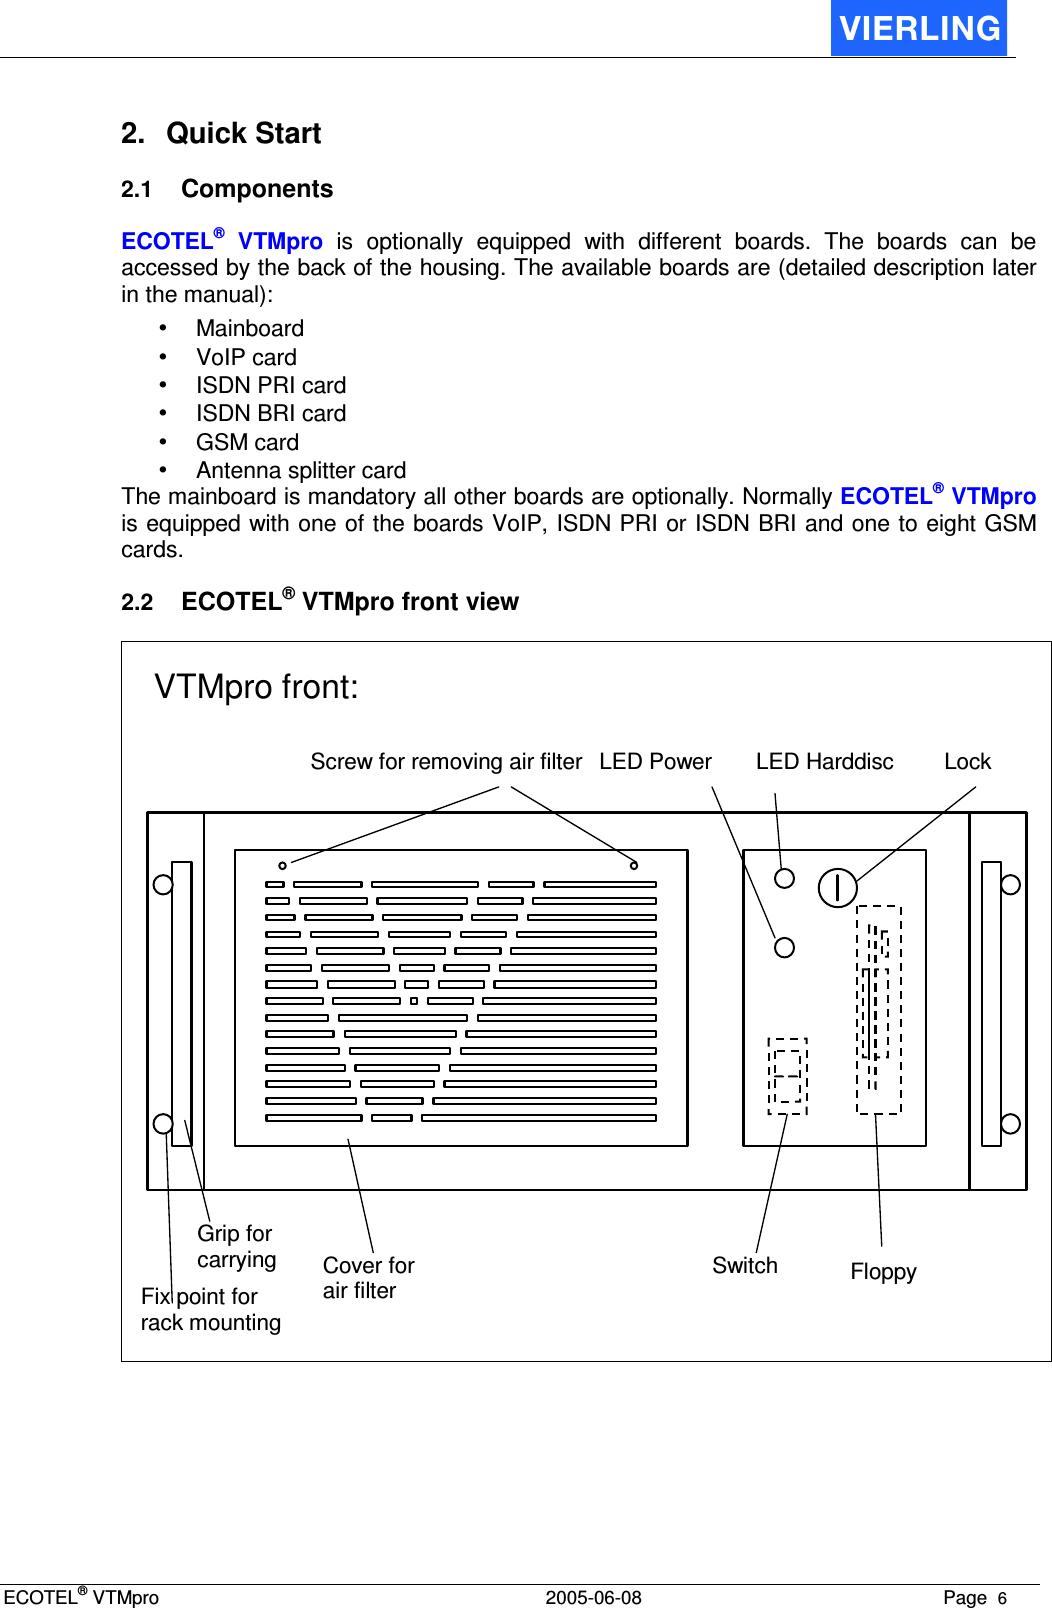 ECOTEL® VTMpro  2005-06-08 Page  6    2.  Quick Start 2.1 Components ECOTEL®  VTMpro  is  optionally  equipped  with  different  boards.  The  boards  can  be accessed by the back of the housing. The available boards are (detailed description later in the manual): • Mainboard • VoIP card • ISDN PRI card • ISDN BRI card • GSM card • Antenna splitter card The mainboard is mandatory all other boards are optionally. Normally ECOTEL® VTMpro is equipped with one of the boards VoIP, ISDN PRI or ISDN BRI and one to eight GSM cards. 2.2 ECOTEL® VTMpro front view  Fix point for rack mounting VTMpro front: Grip for carrying Cover for air filter Switch Floppy LED HarddiscLED Power Lock Screw for removing air filter  